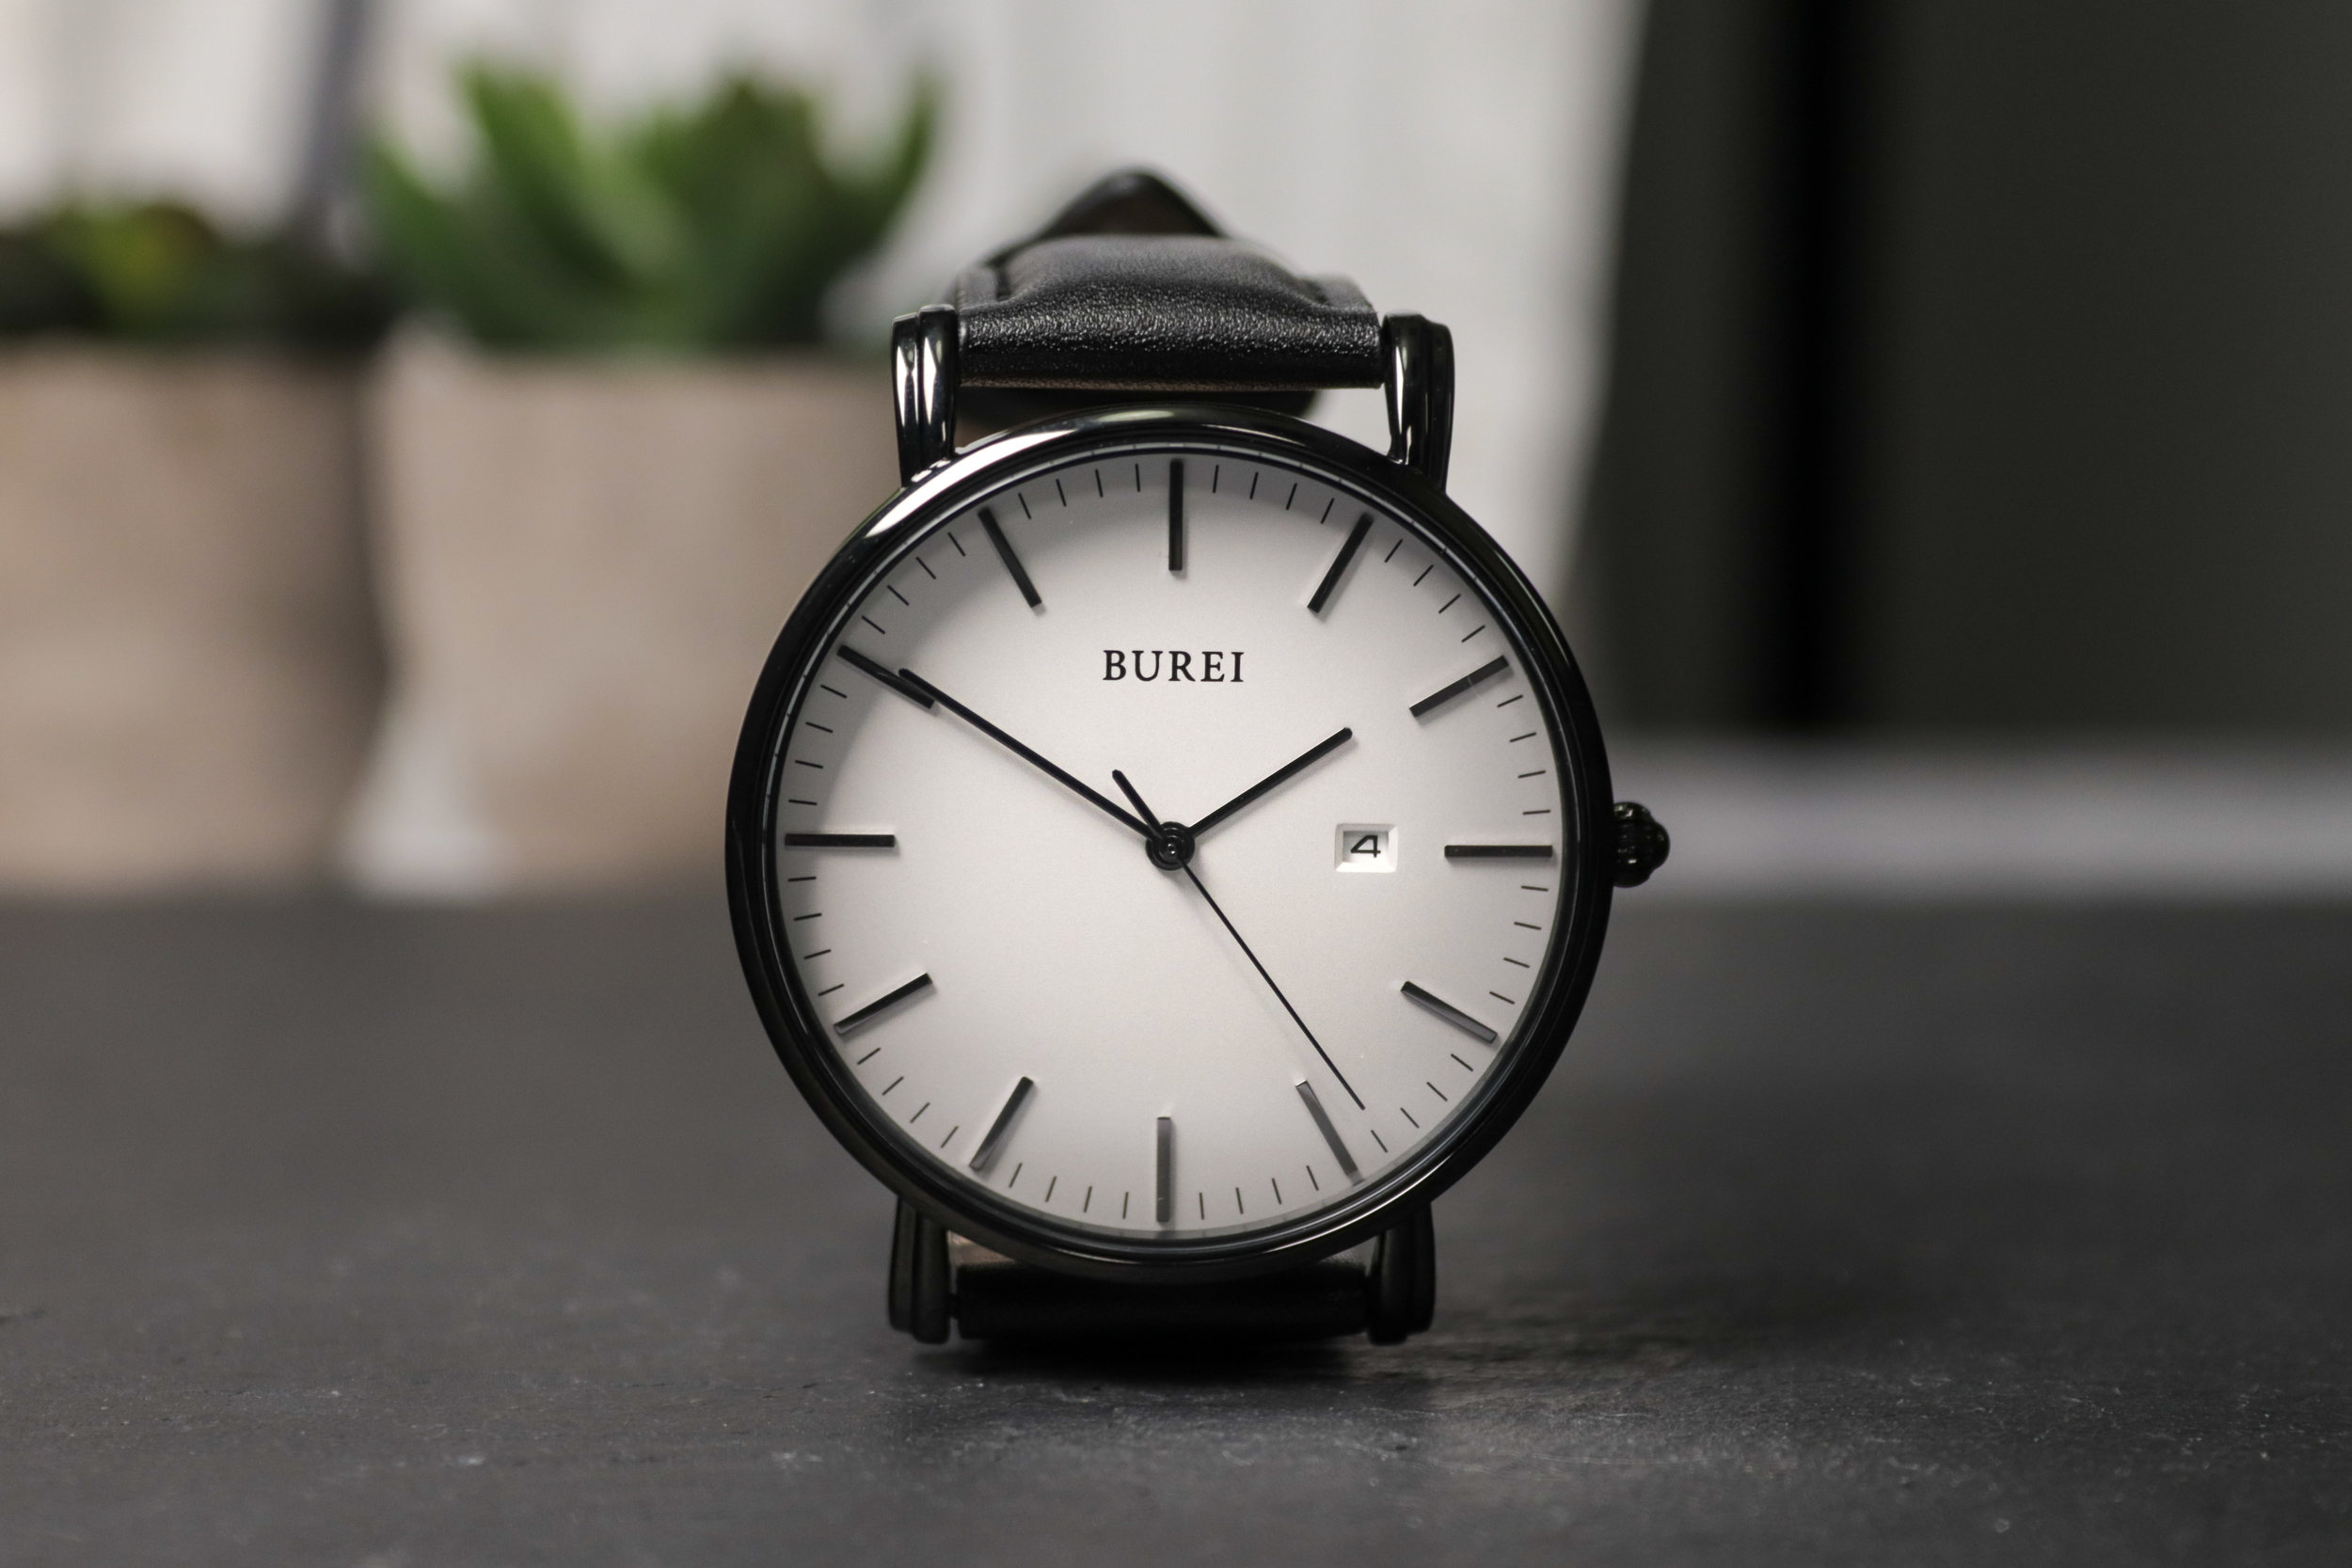 Better Alternatives To Daniel Wellington Watches Ben's Watch - Exploring Affordable